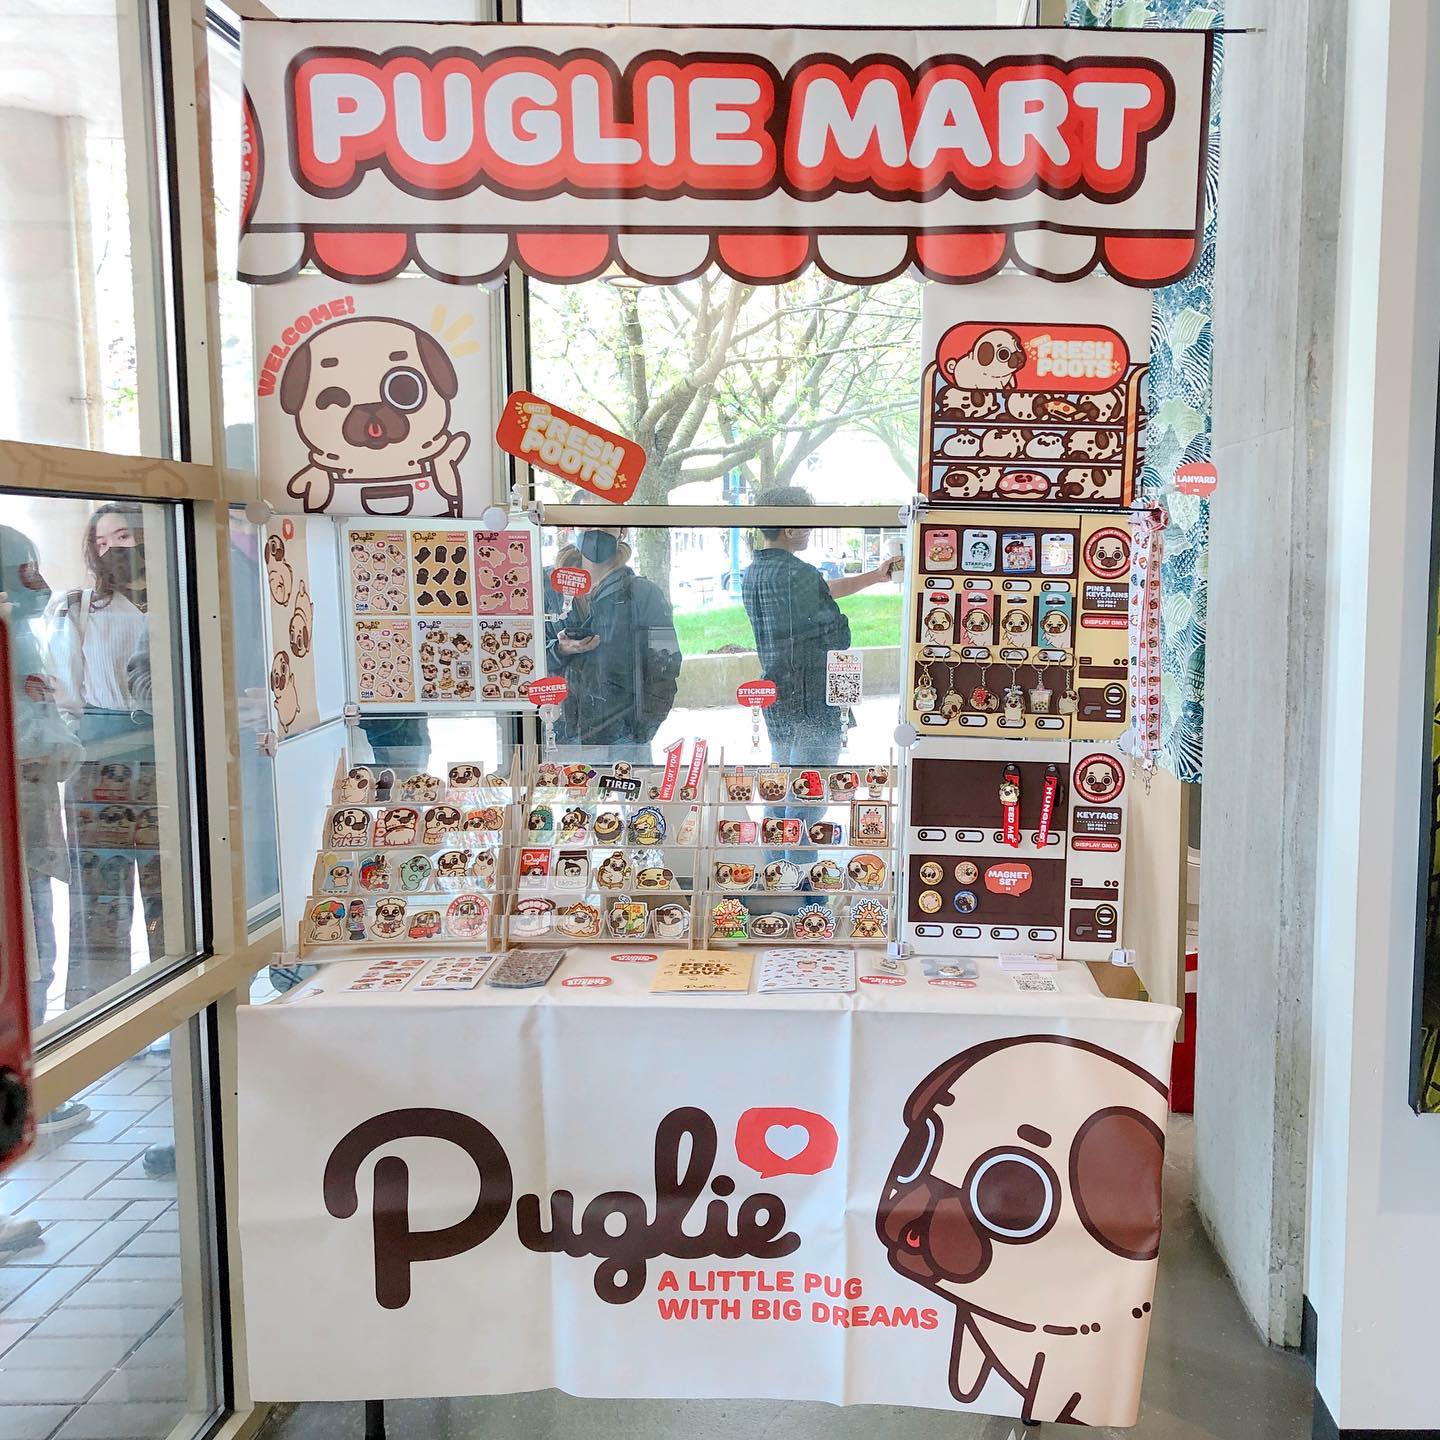 Photo of the Puglie Mart booth set up in the corner of Matcha Cafe Maiko.